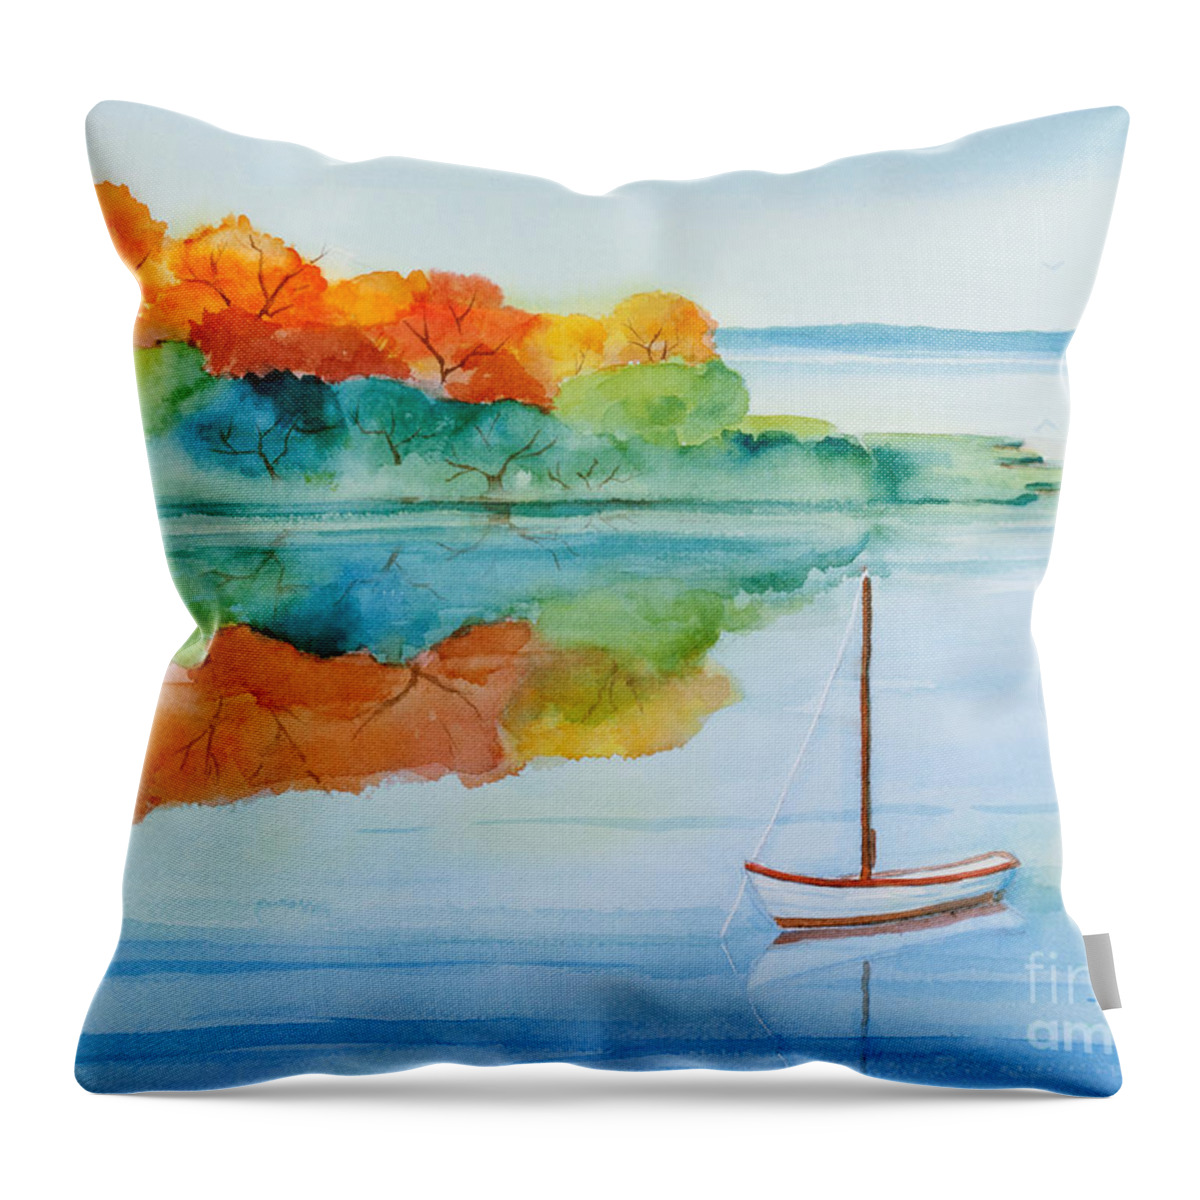 Peacefully Waiting Throw Pillow featuring the painting Peacefully Waiting Watercolor by Michelle Constantine